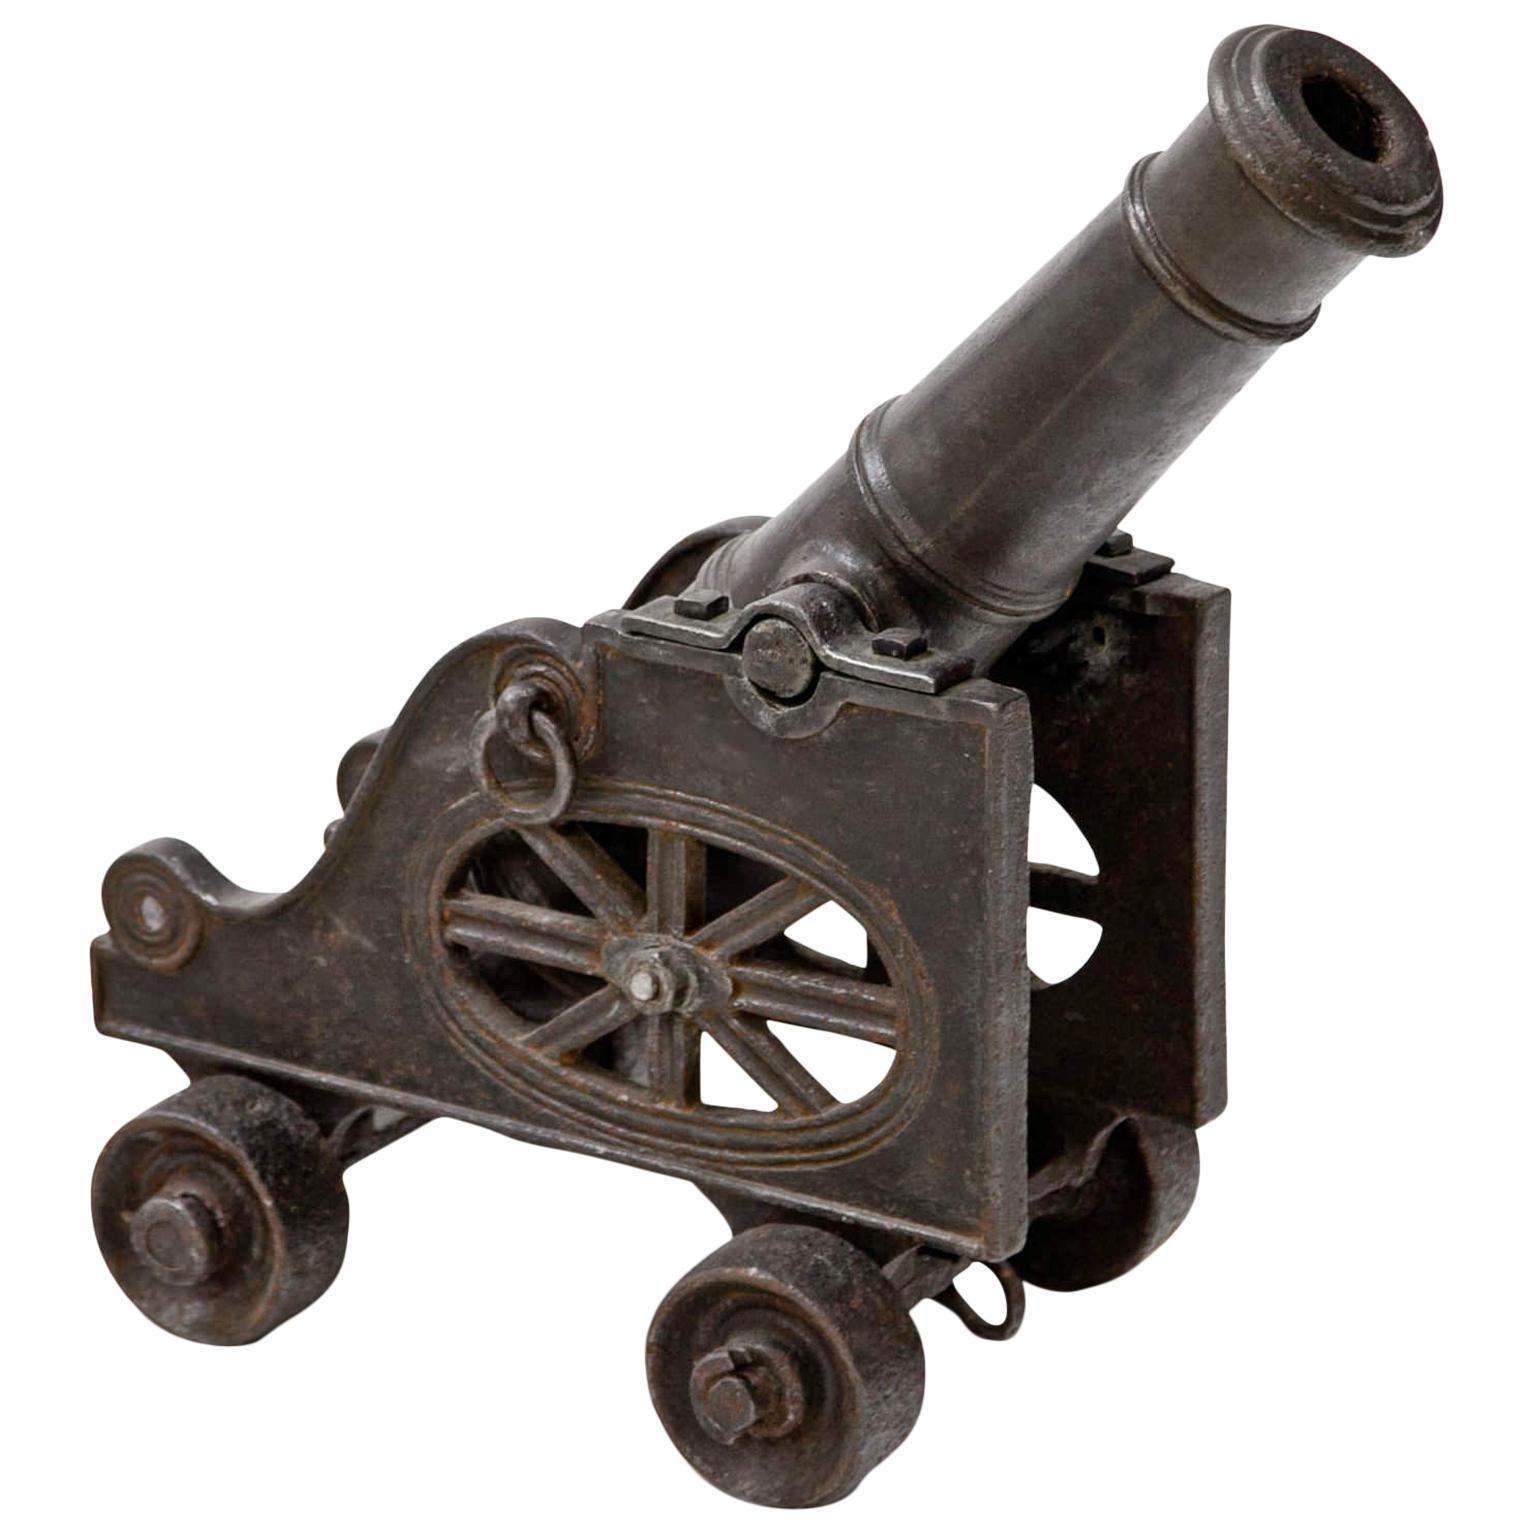 Cannon, Probably 18th Century